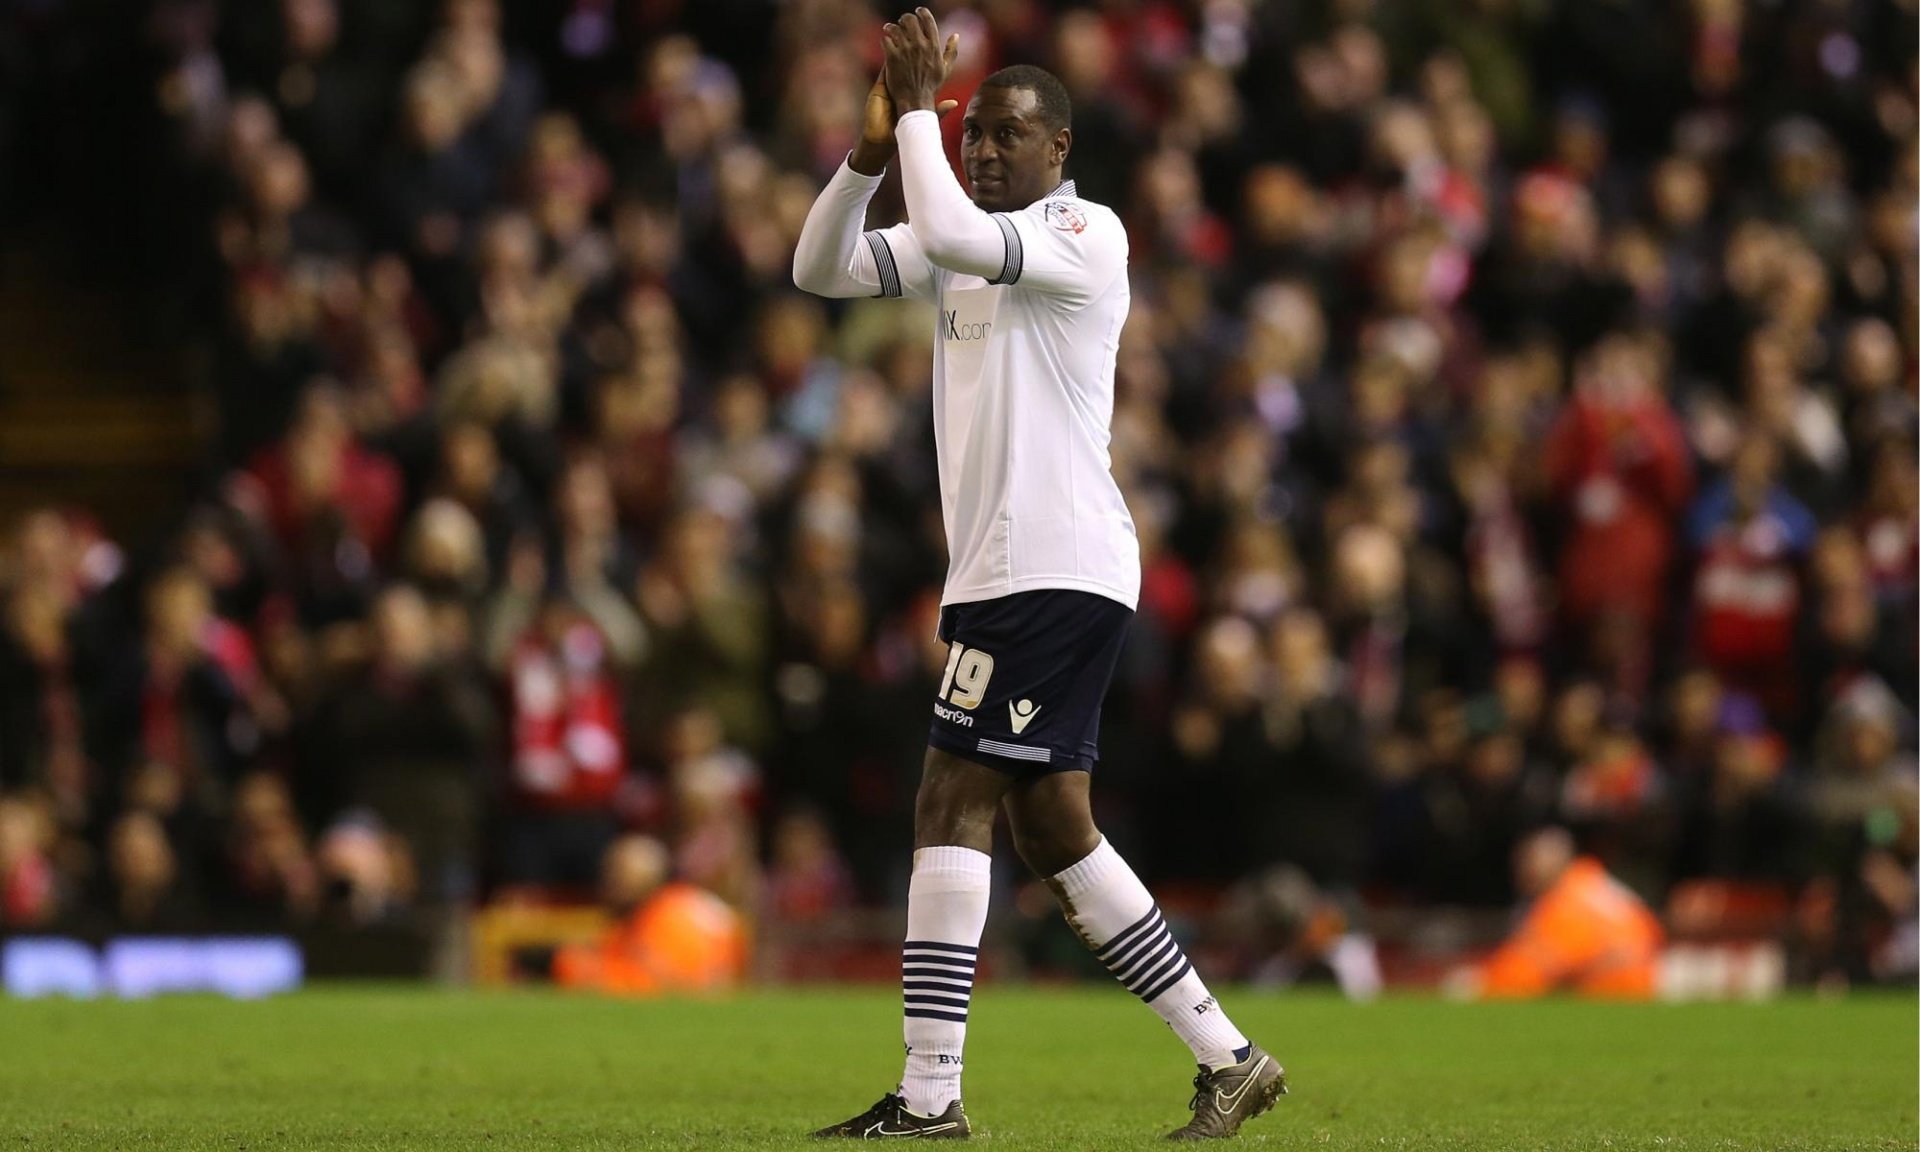  Bolton in talks to extend Emile Heskey’s contract but release 13 players 